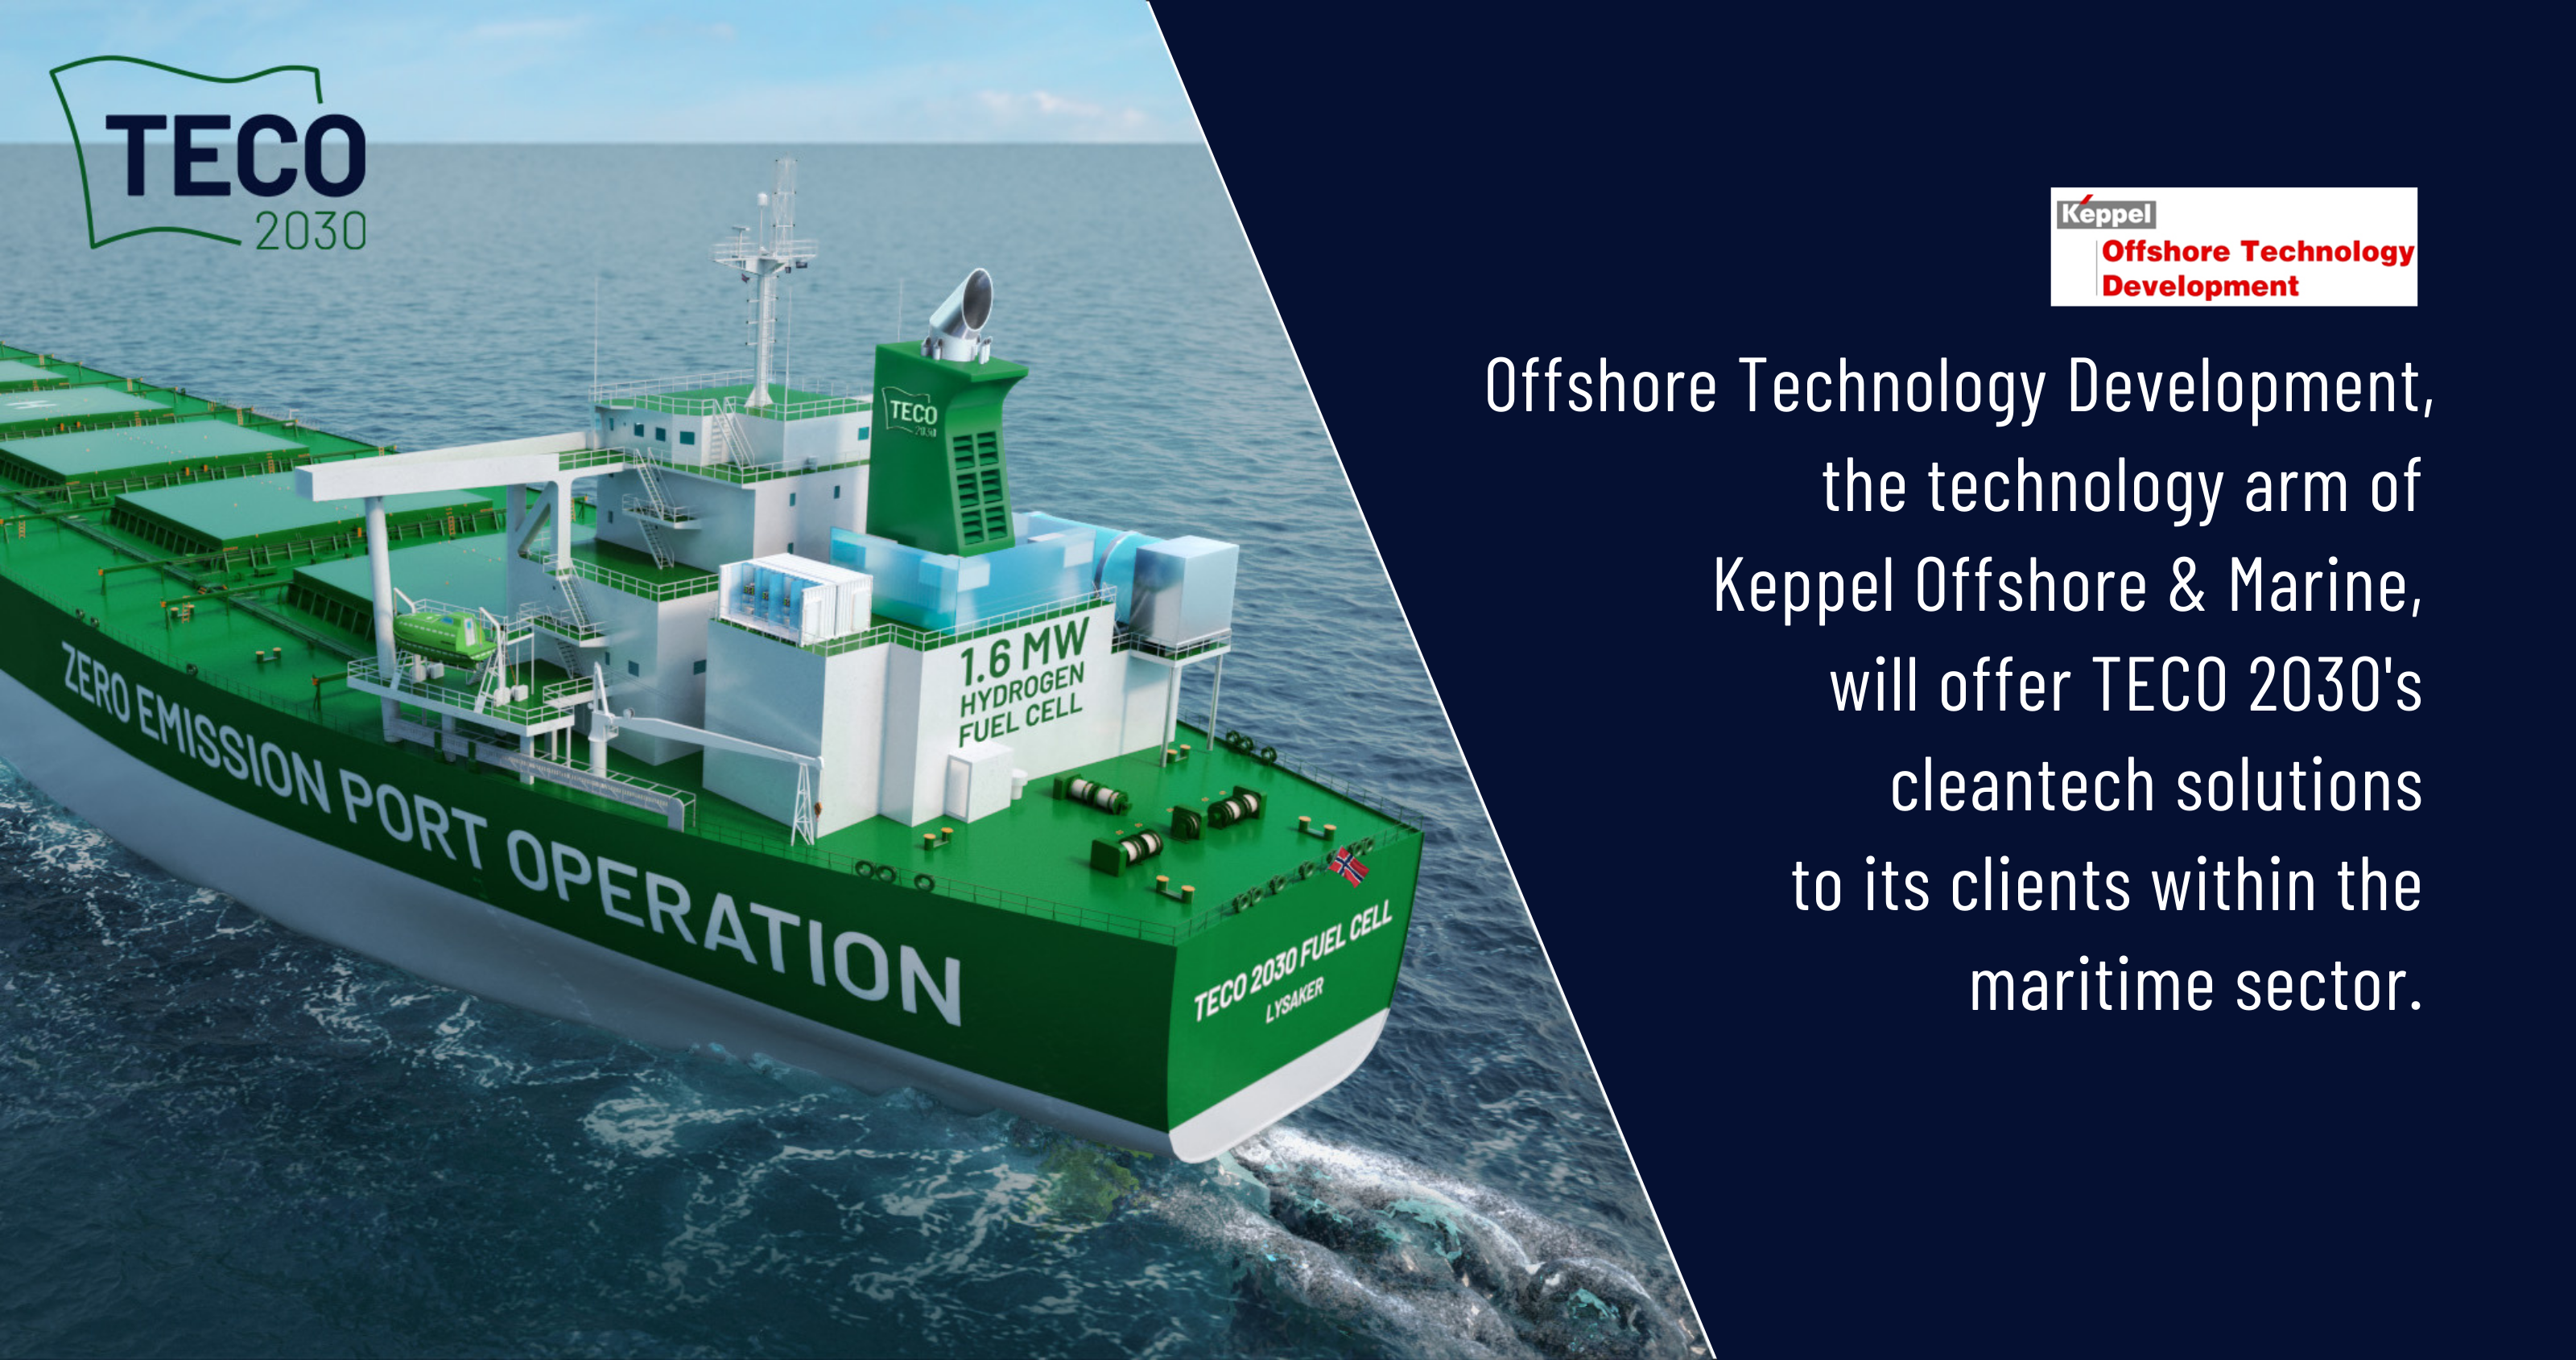 Offshore Technology Development, the technology arm of Keppel Offshore & Marine, will offer TECO 2030’s cleantech products, such as hydrogen fuel cells, carbon capture and storage (CCS) solutions and exhaust gas cleaning systems, to its clients within the maritime sector.